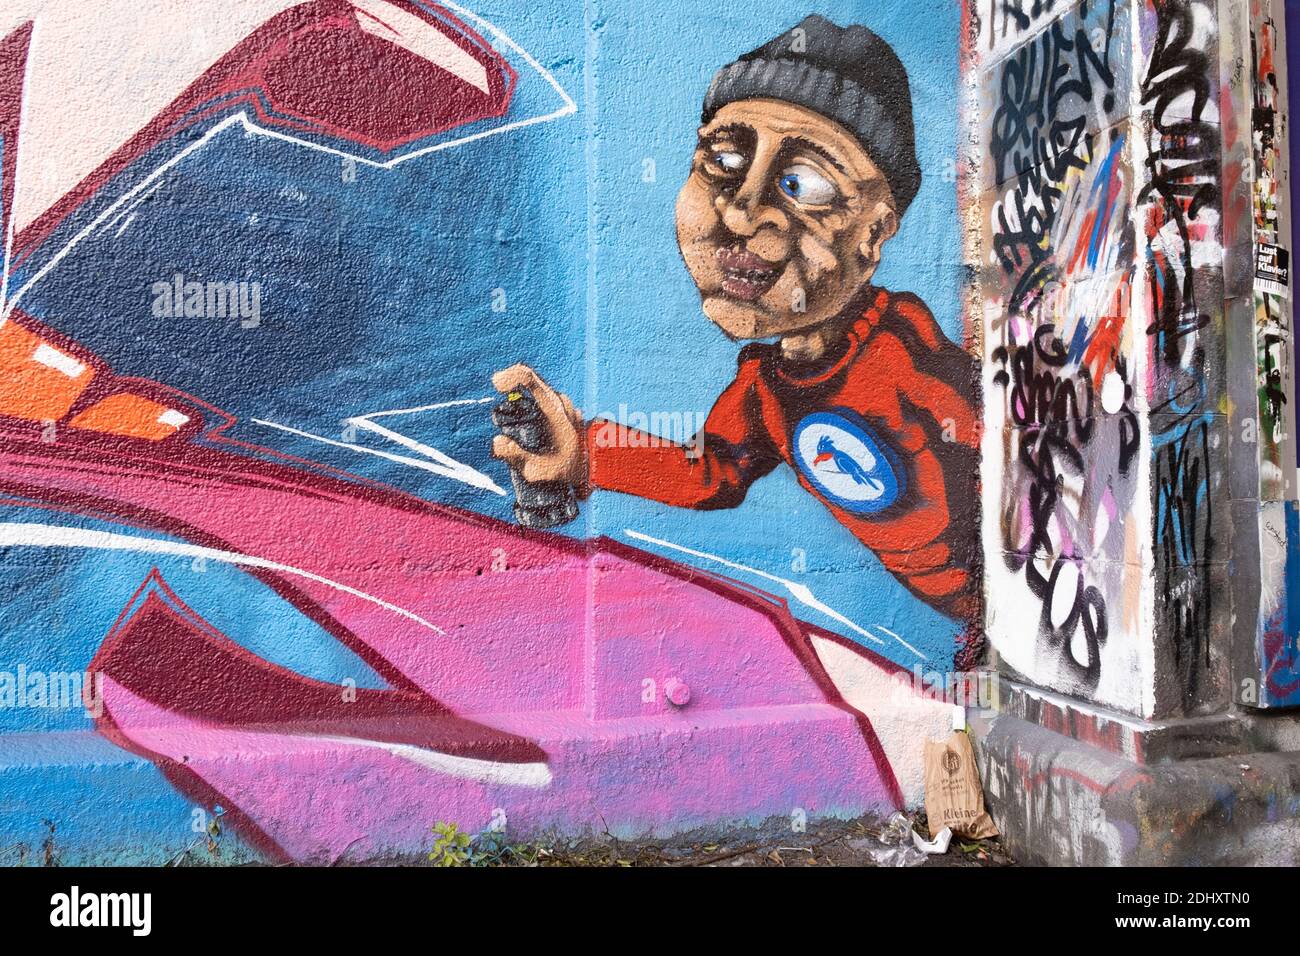 Human likeness of a spraypainter on a wall in Munich, Bavaria, Germany. Stock Photo